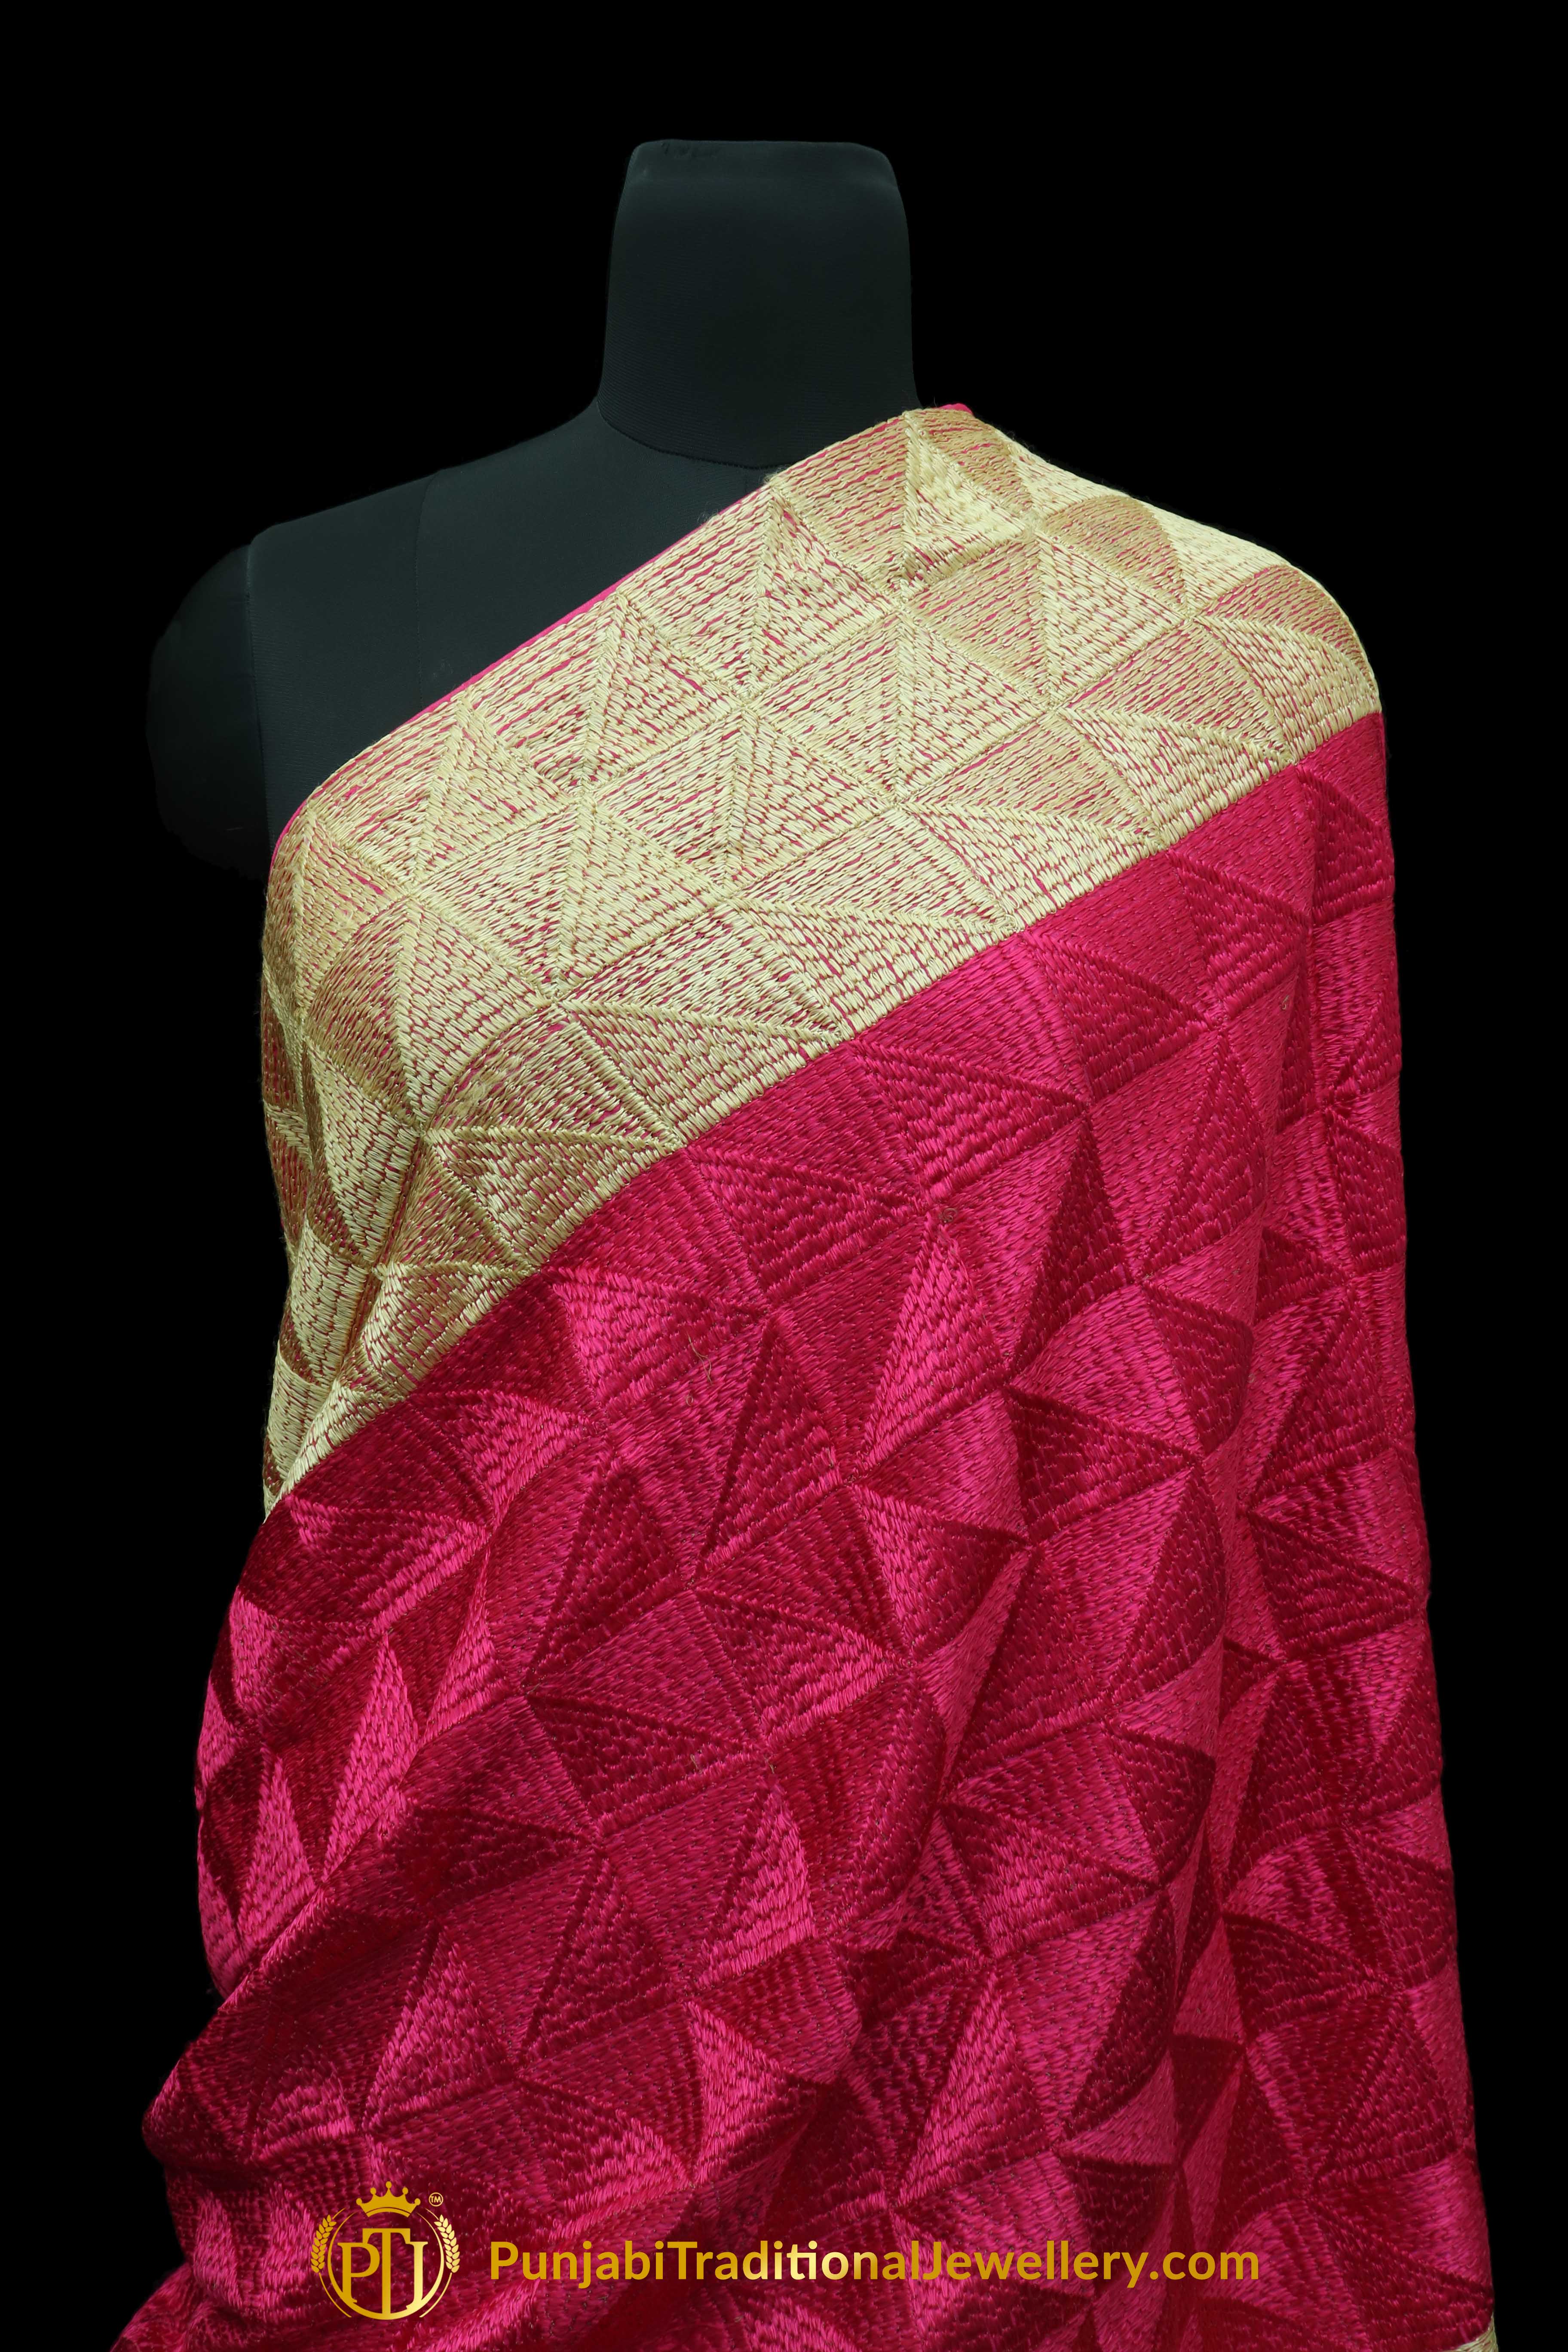 Pure Phulkari Dupatta With Golden & Pink Color By Punjabi Traditional Jewellery